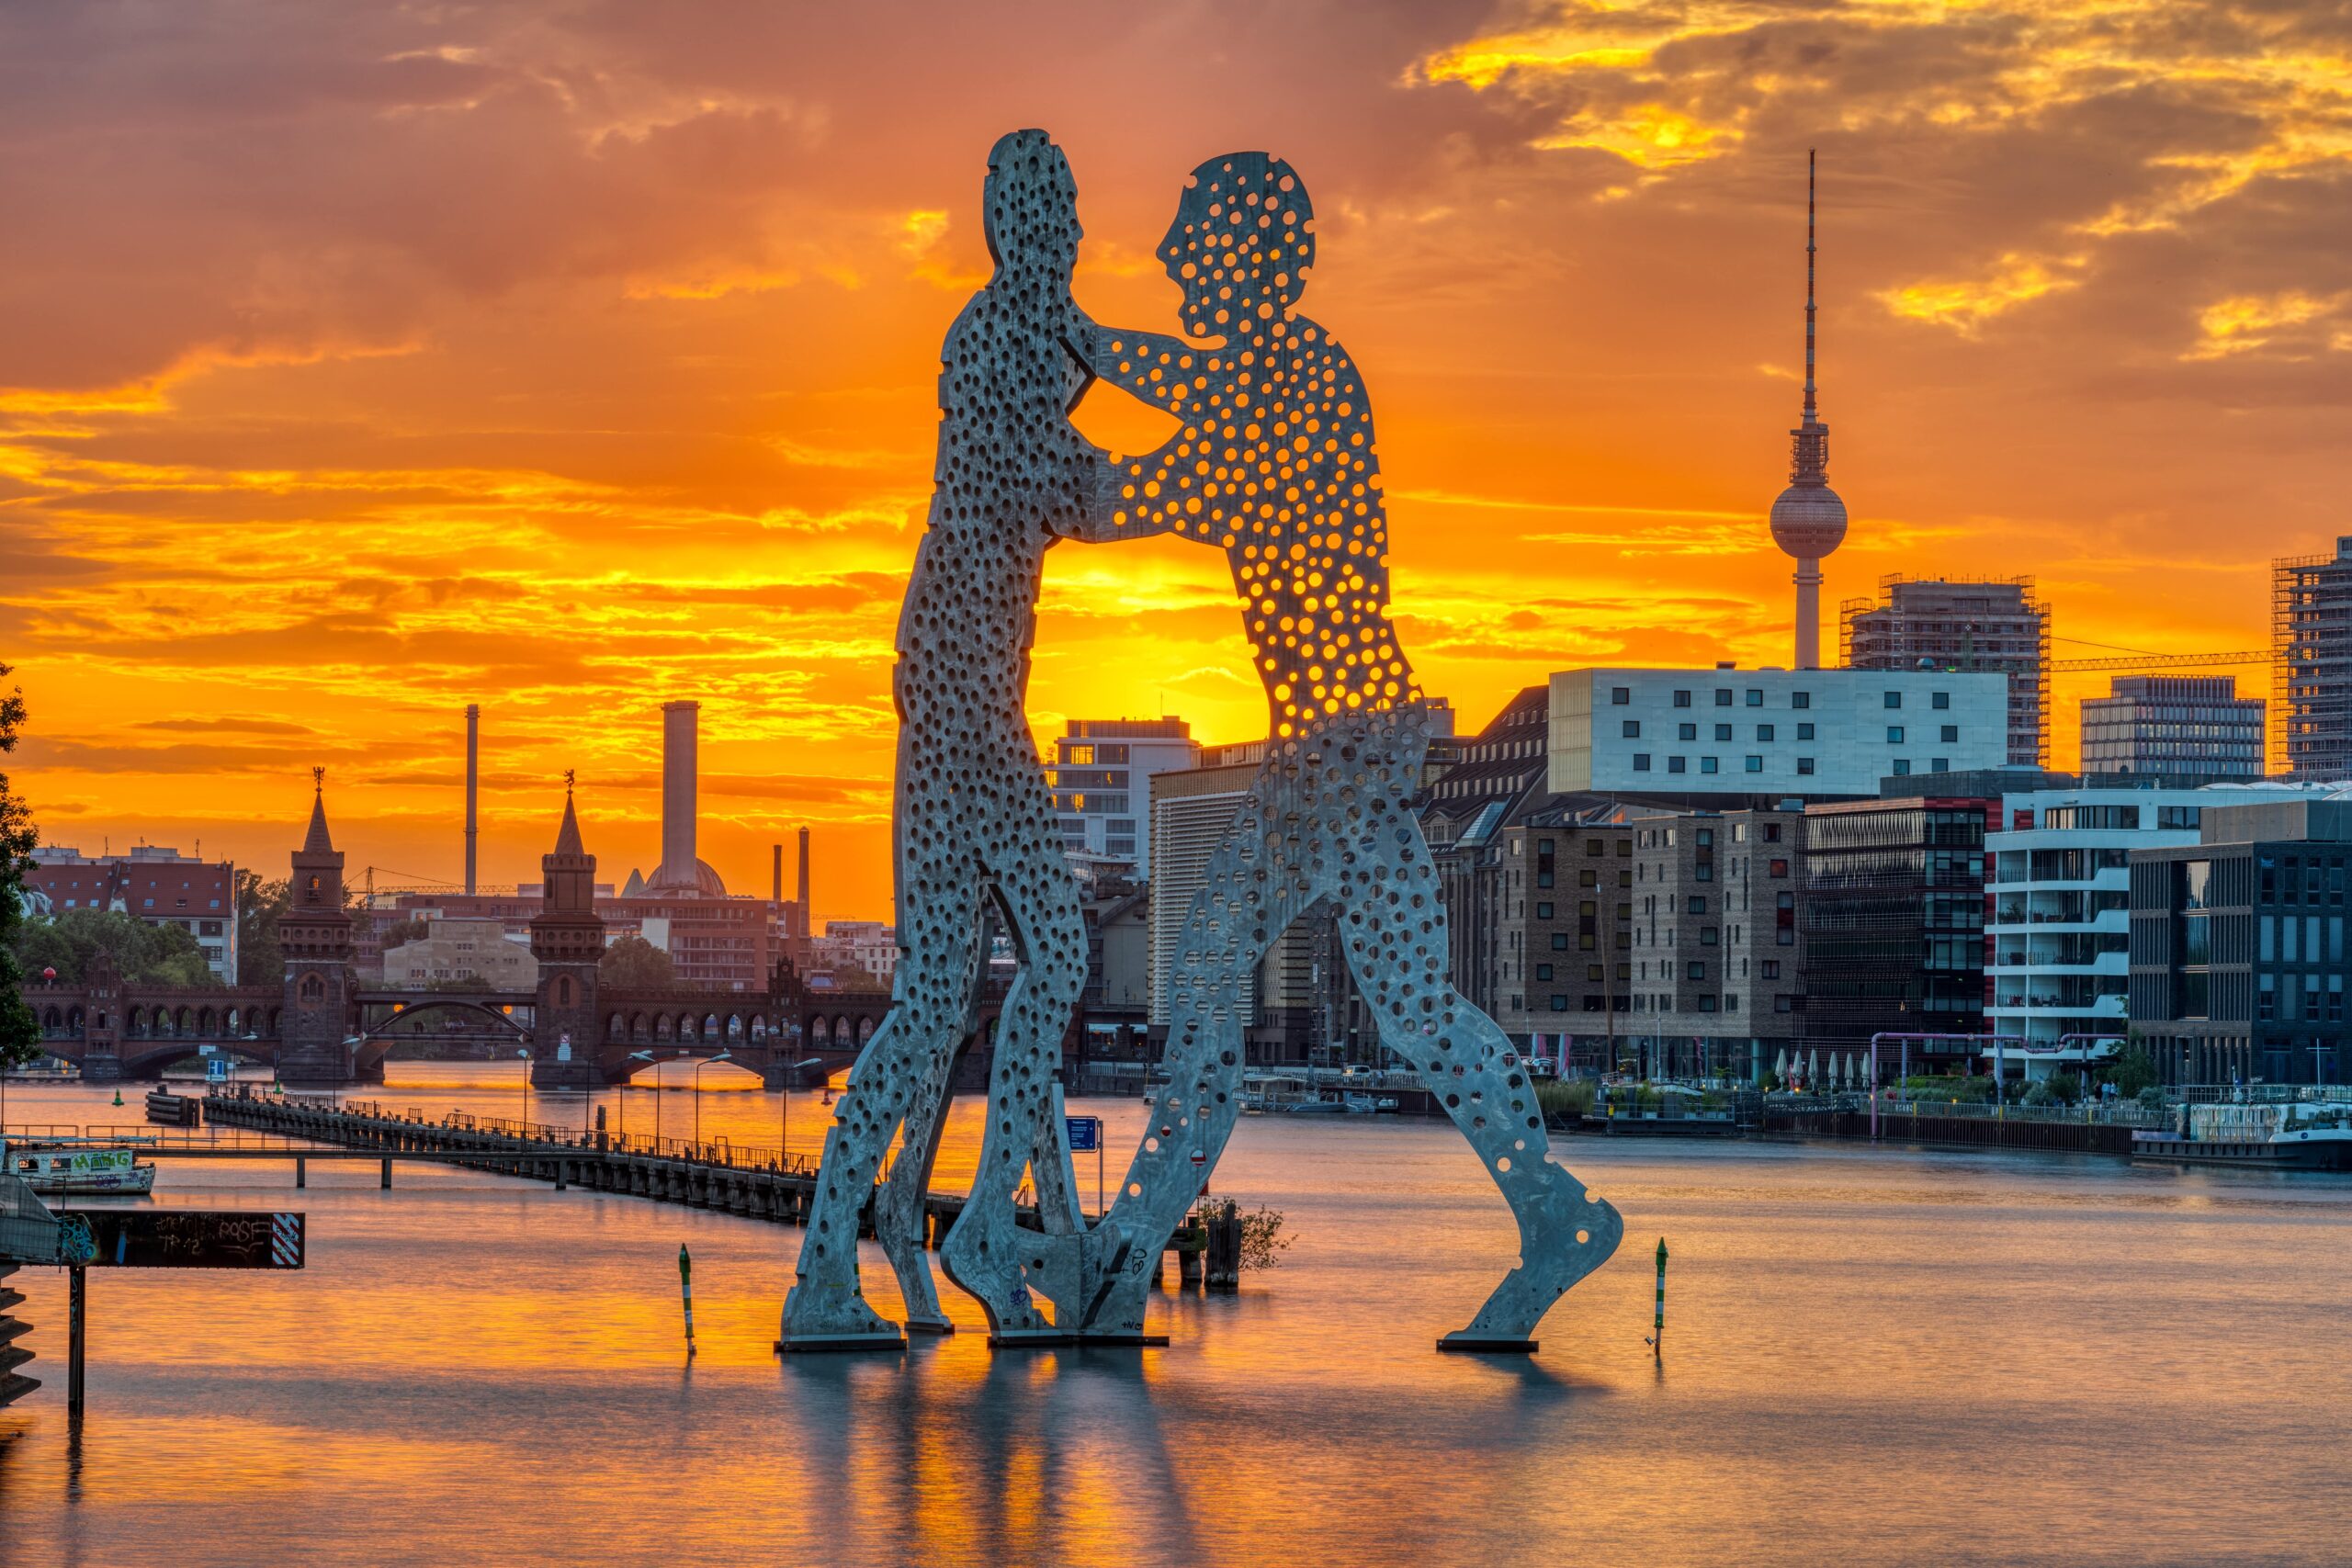 sunset-in-berlin-with-the-river-spree-2023-11-27-05-08-48-utc-min-scaled[1]